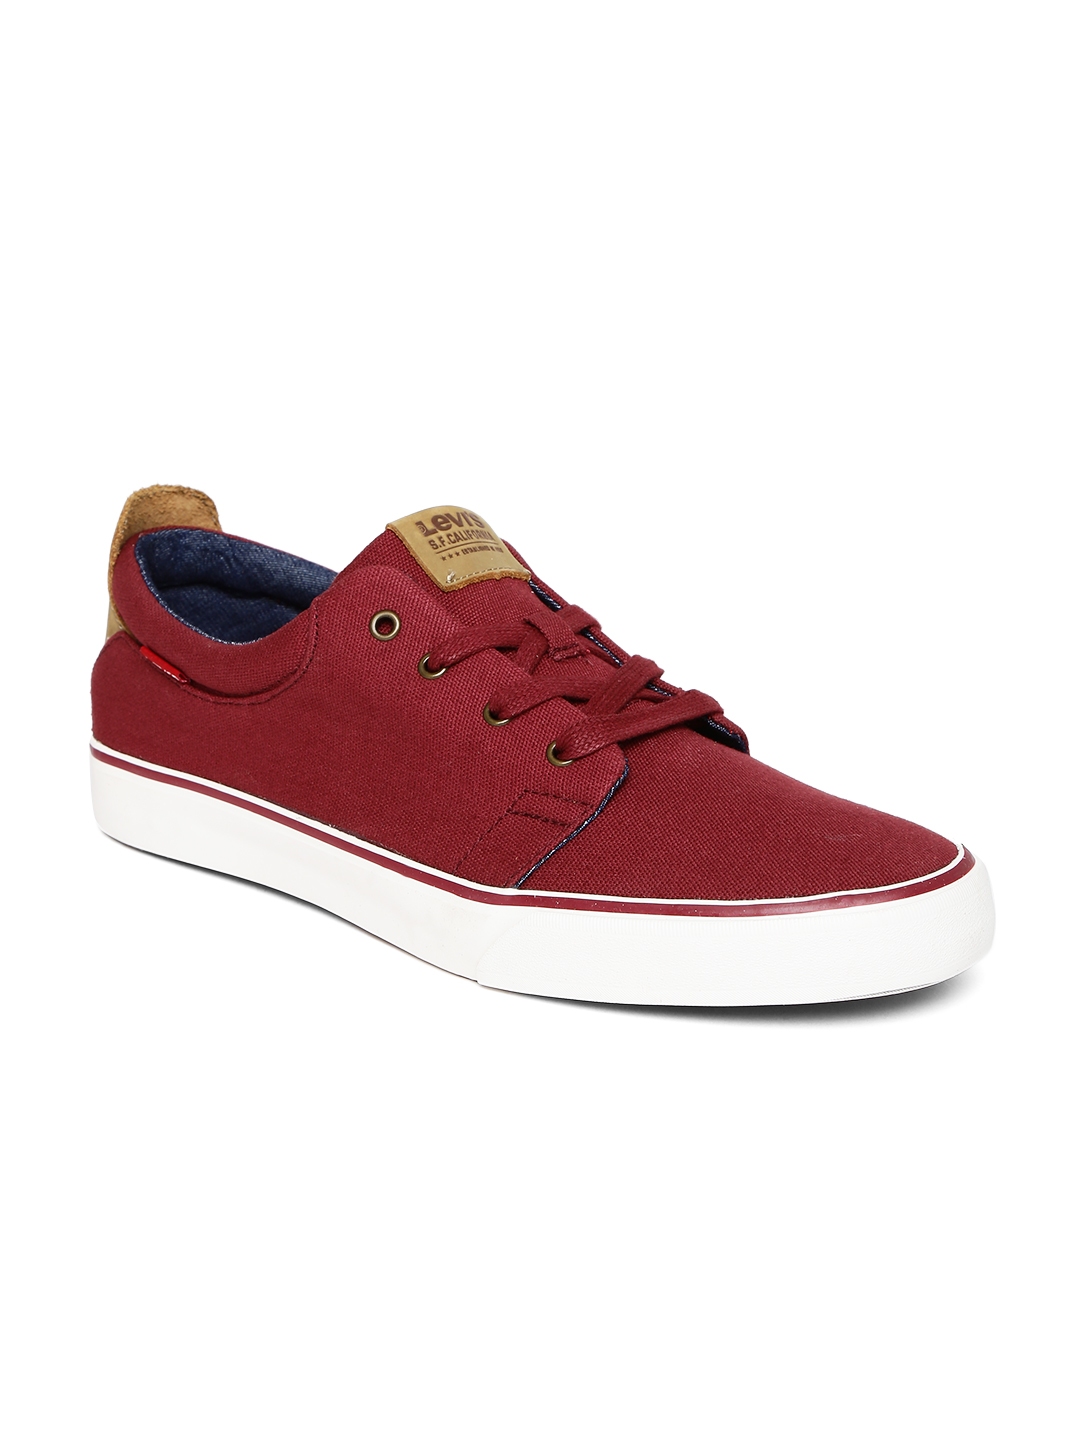 Buy Levis Men Red Sneakers - Casual Shoes for Men 2042614 | Myntra